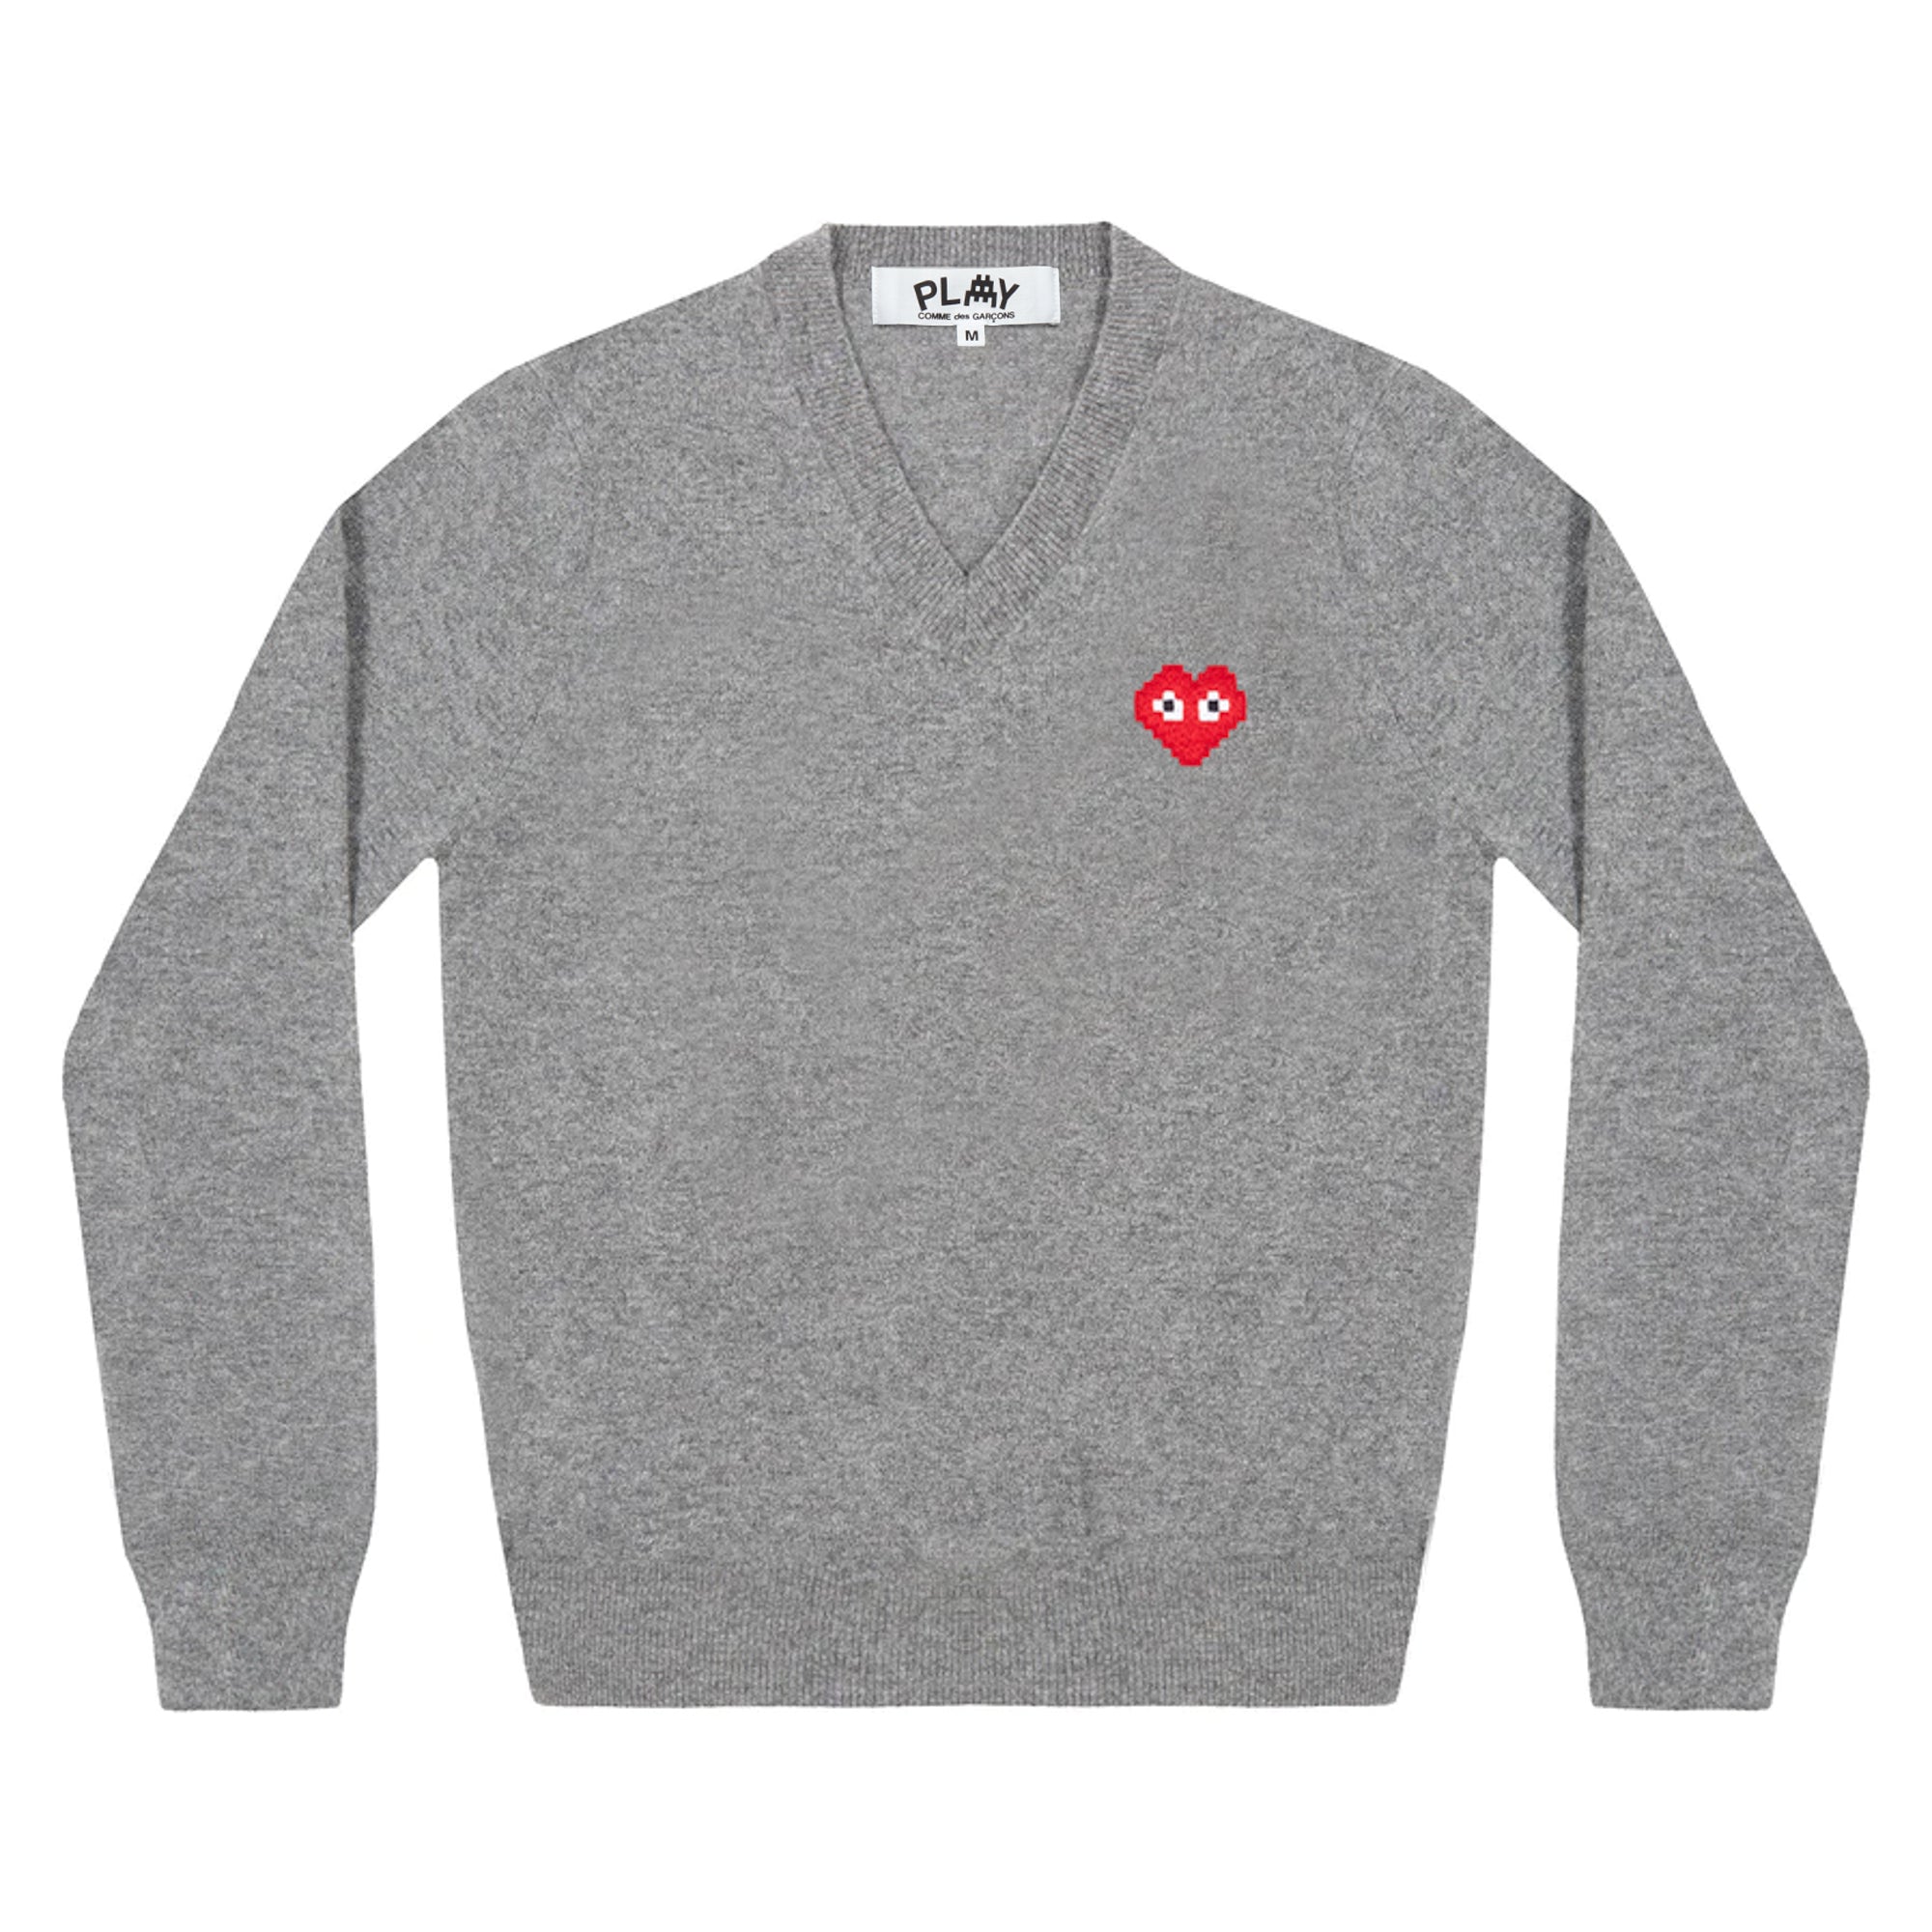 PLAY CDG - INVADER V Neck Sweater - (Top Grey) view 1